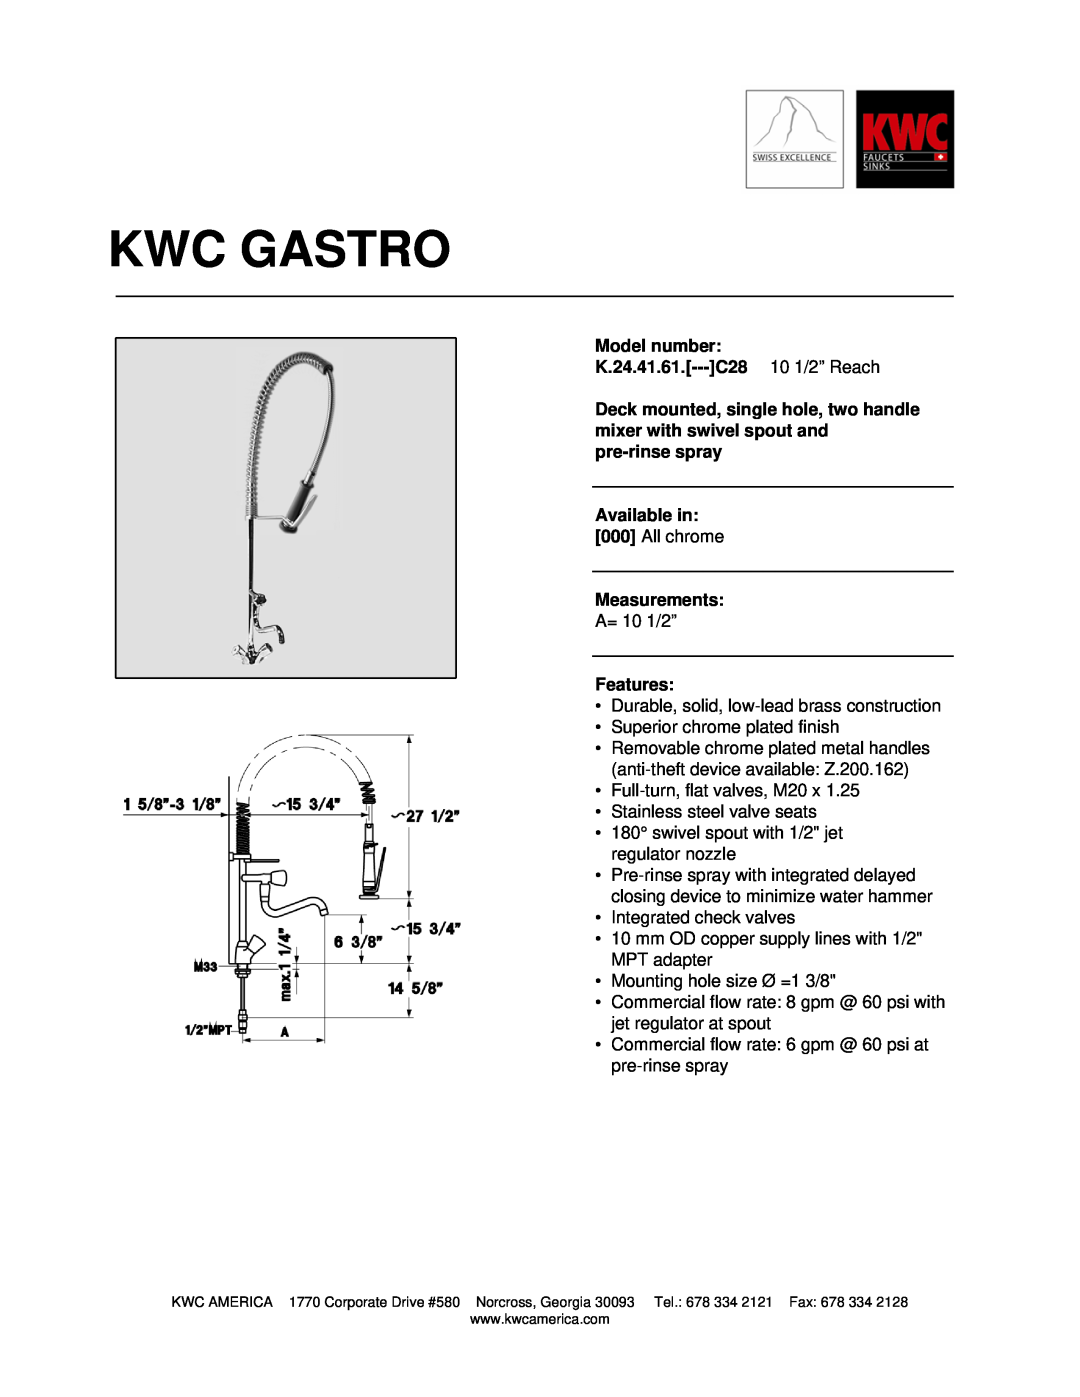 KWC manual Kwc Gastro, Model number K.24.41.61.---C28 10 1/2” Reach, Available in, Measurements, Features 